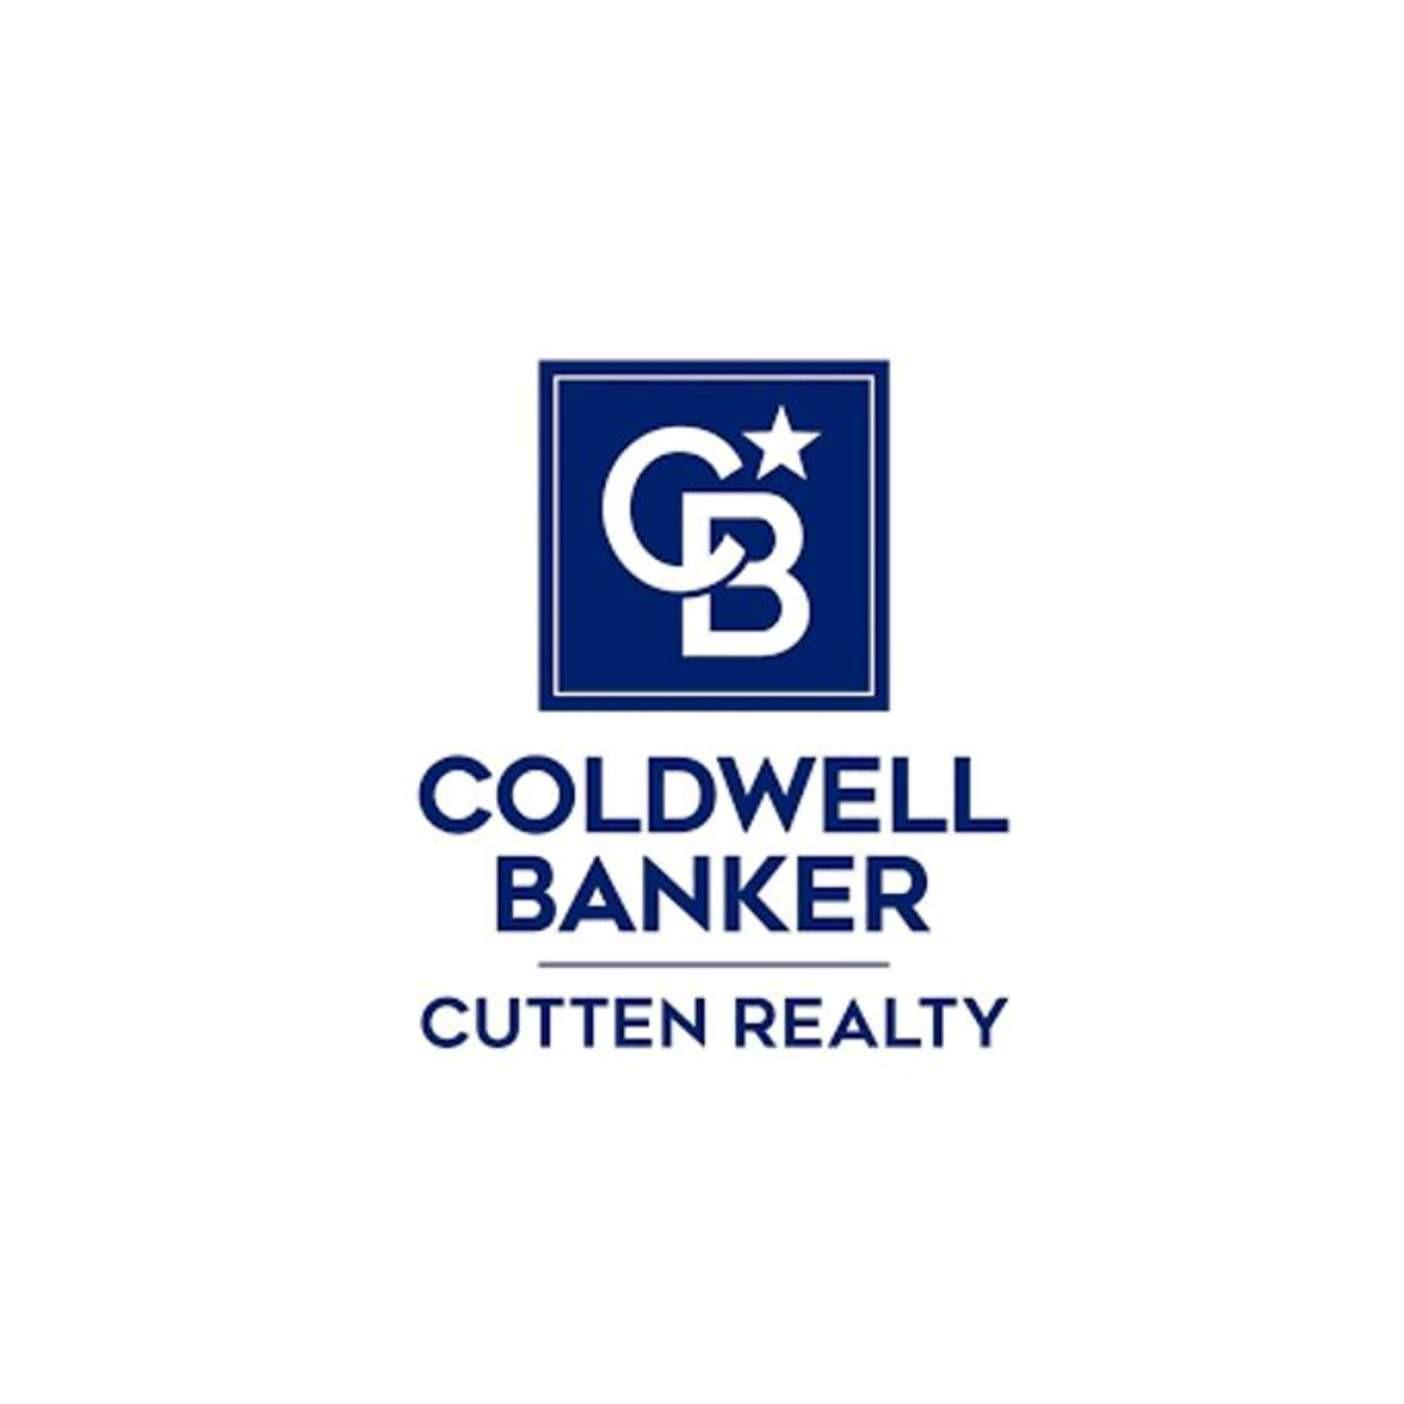 Victoria Foersterling | Coldwell Banker Cutten Realty - Eureka, CA 95503 - (707)616-1417 | ShowMeLocal.com